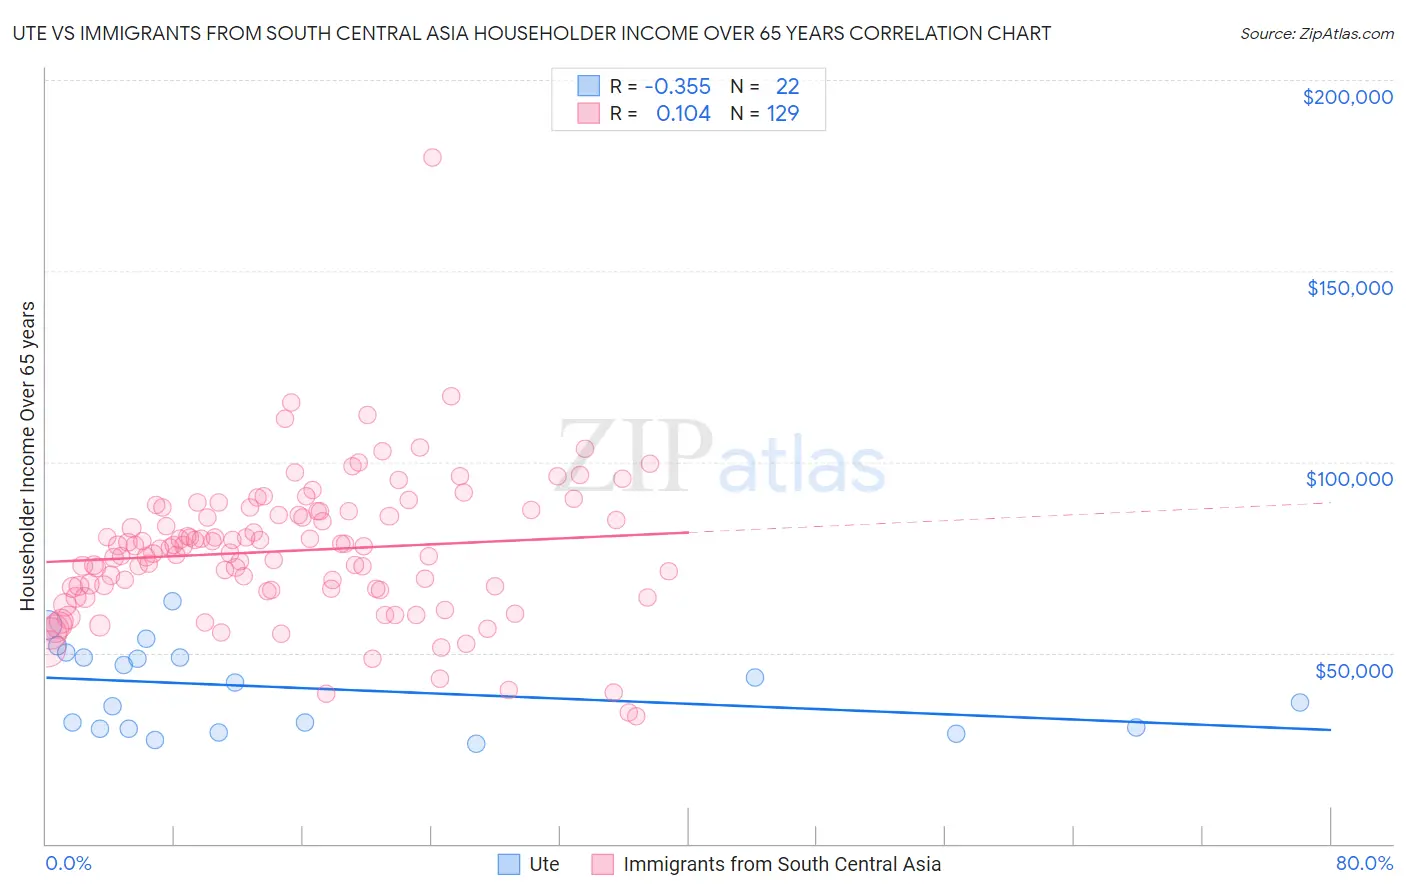 Ute vs Immigrants from South Central Asia Householder Income Over 65 years